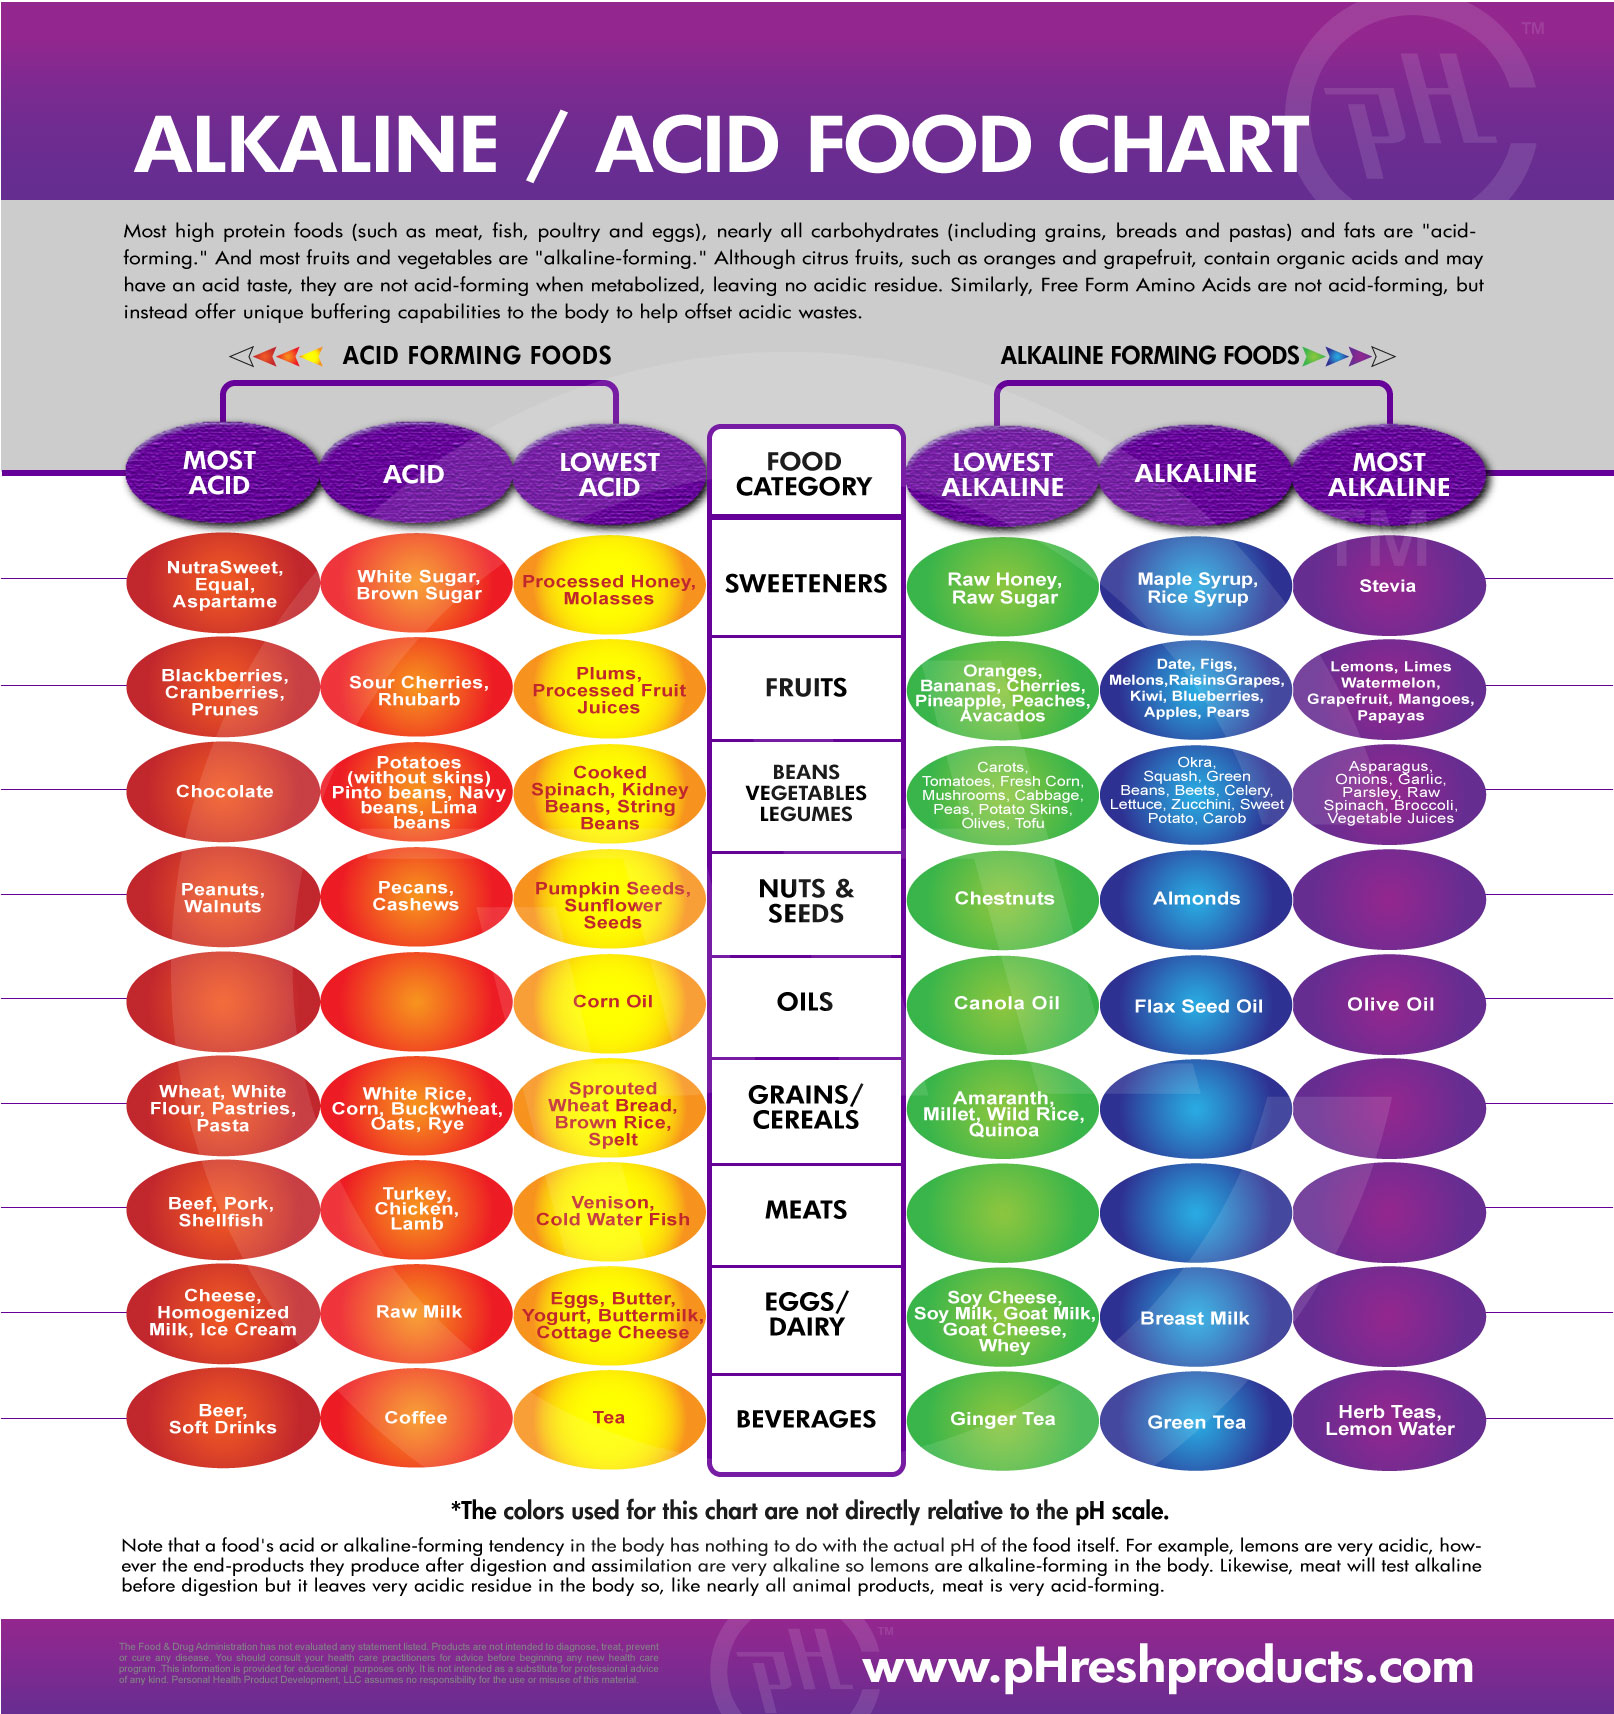 alkaline food chart Eczema: Types, Symptoms, Causes and Treatment